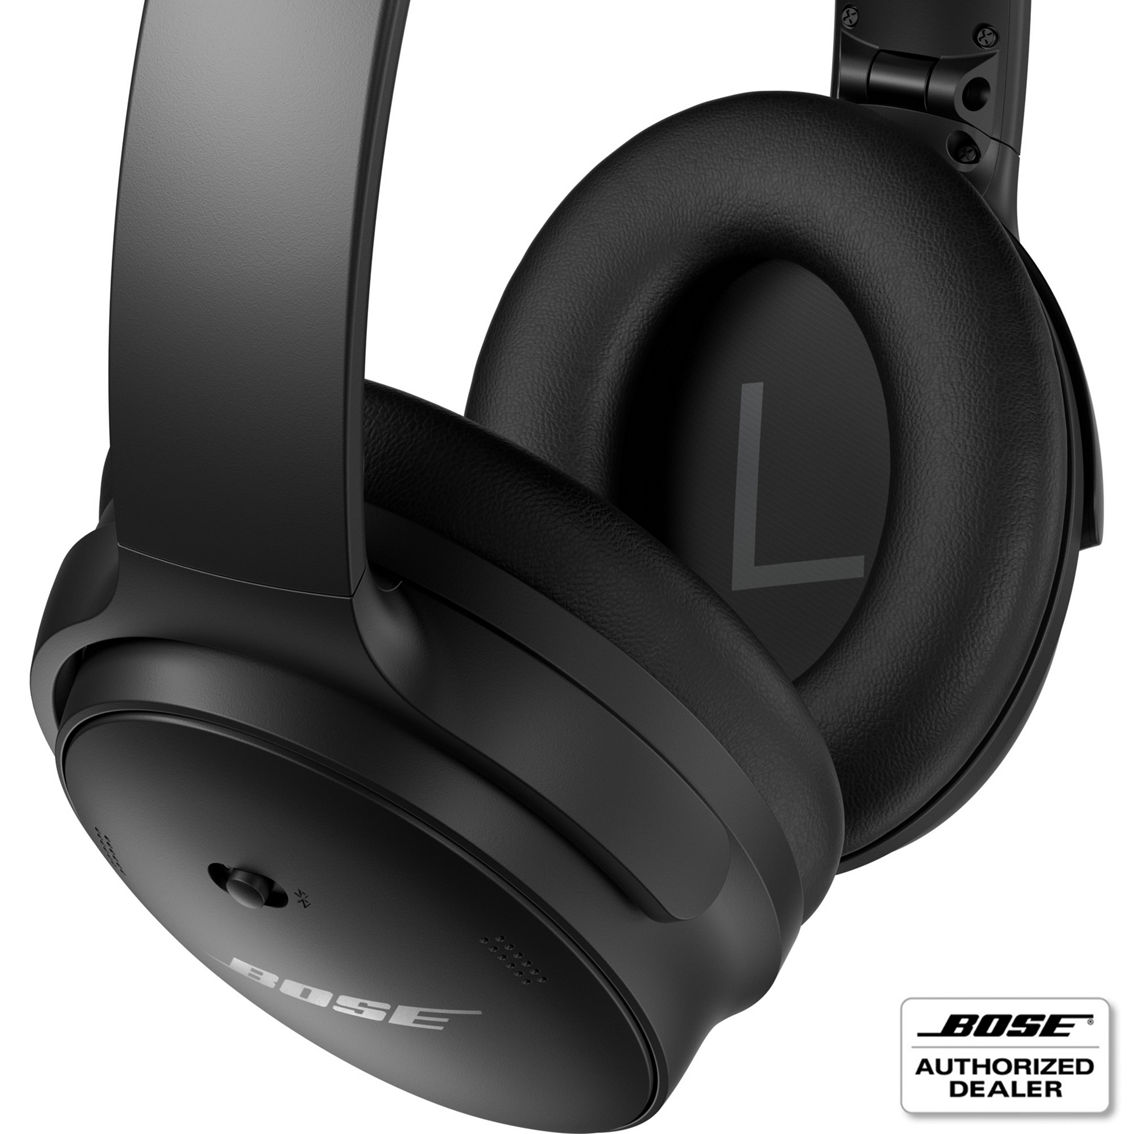 Bose QuietComfort 45 Limited Edition Noise Canceling Headphones - Image 3 of 6